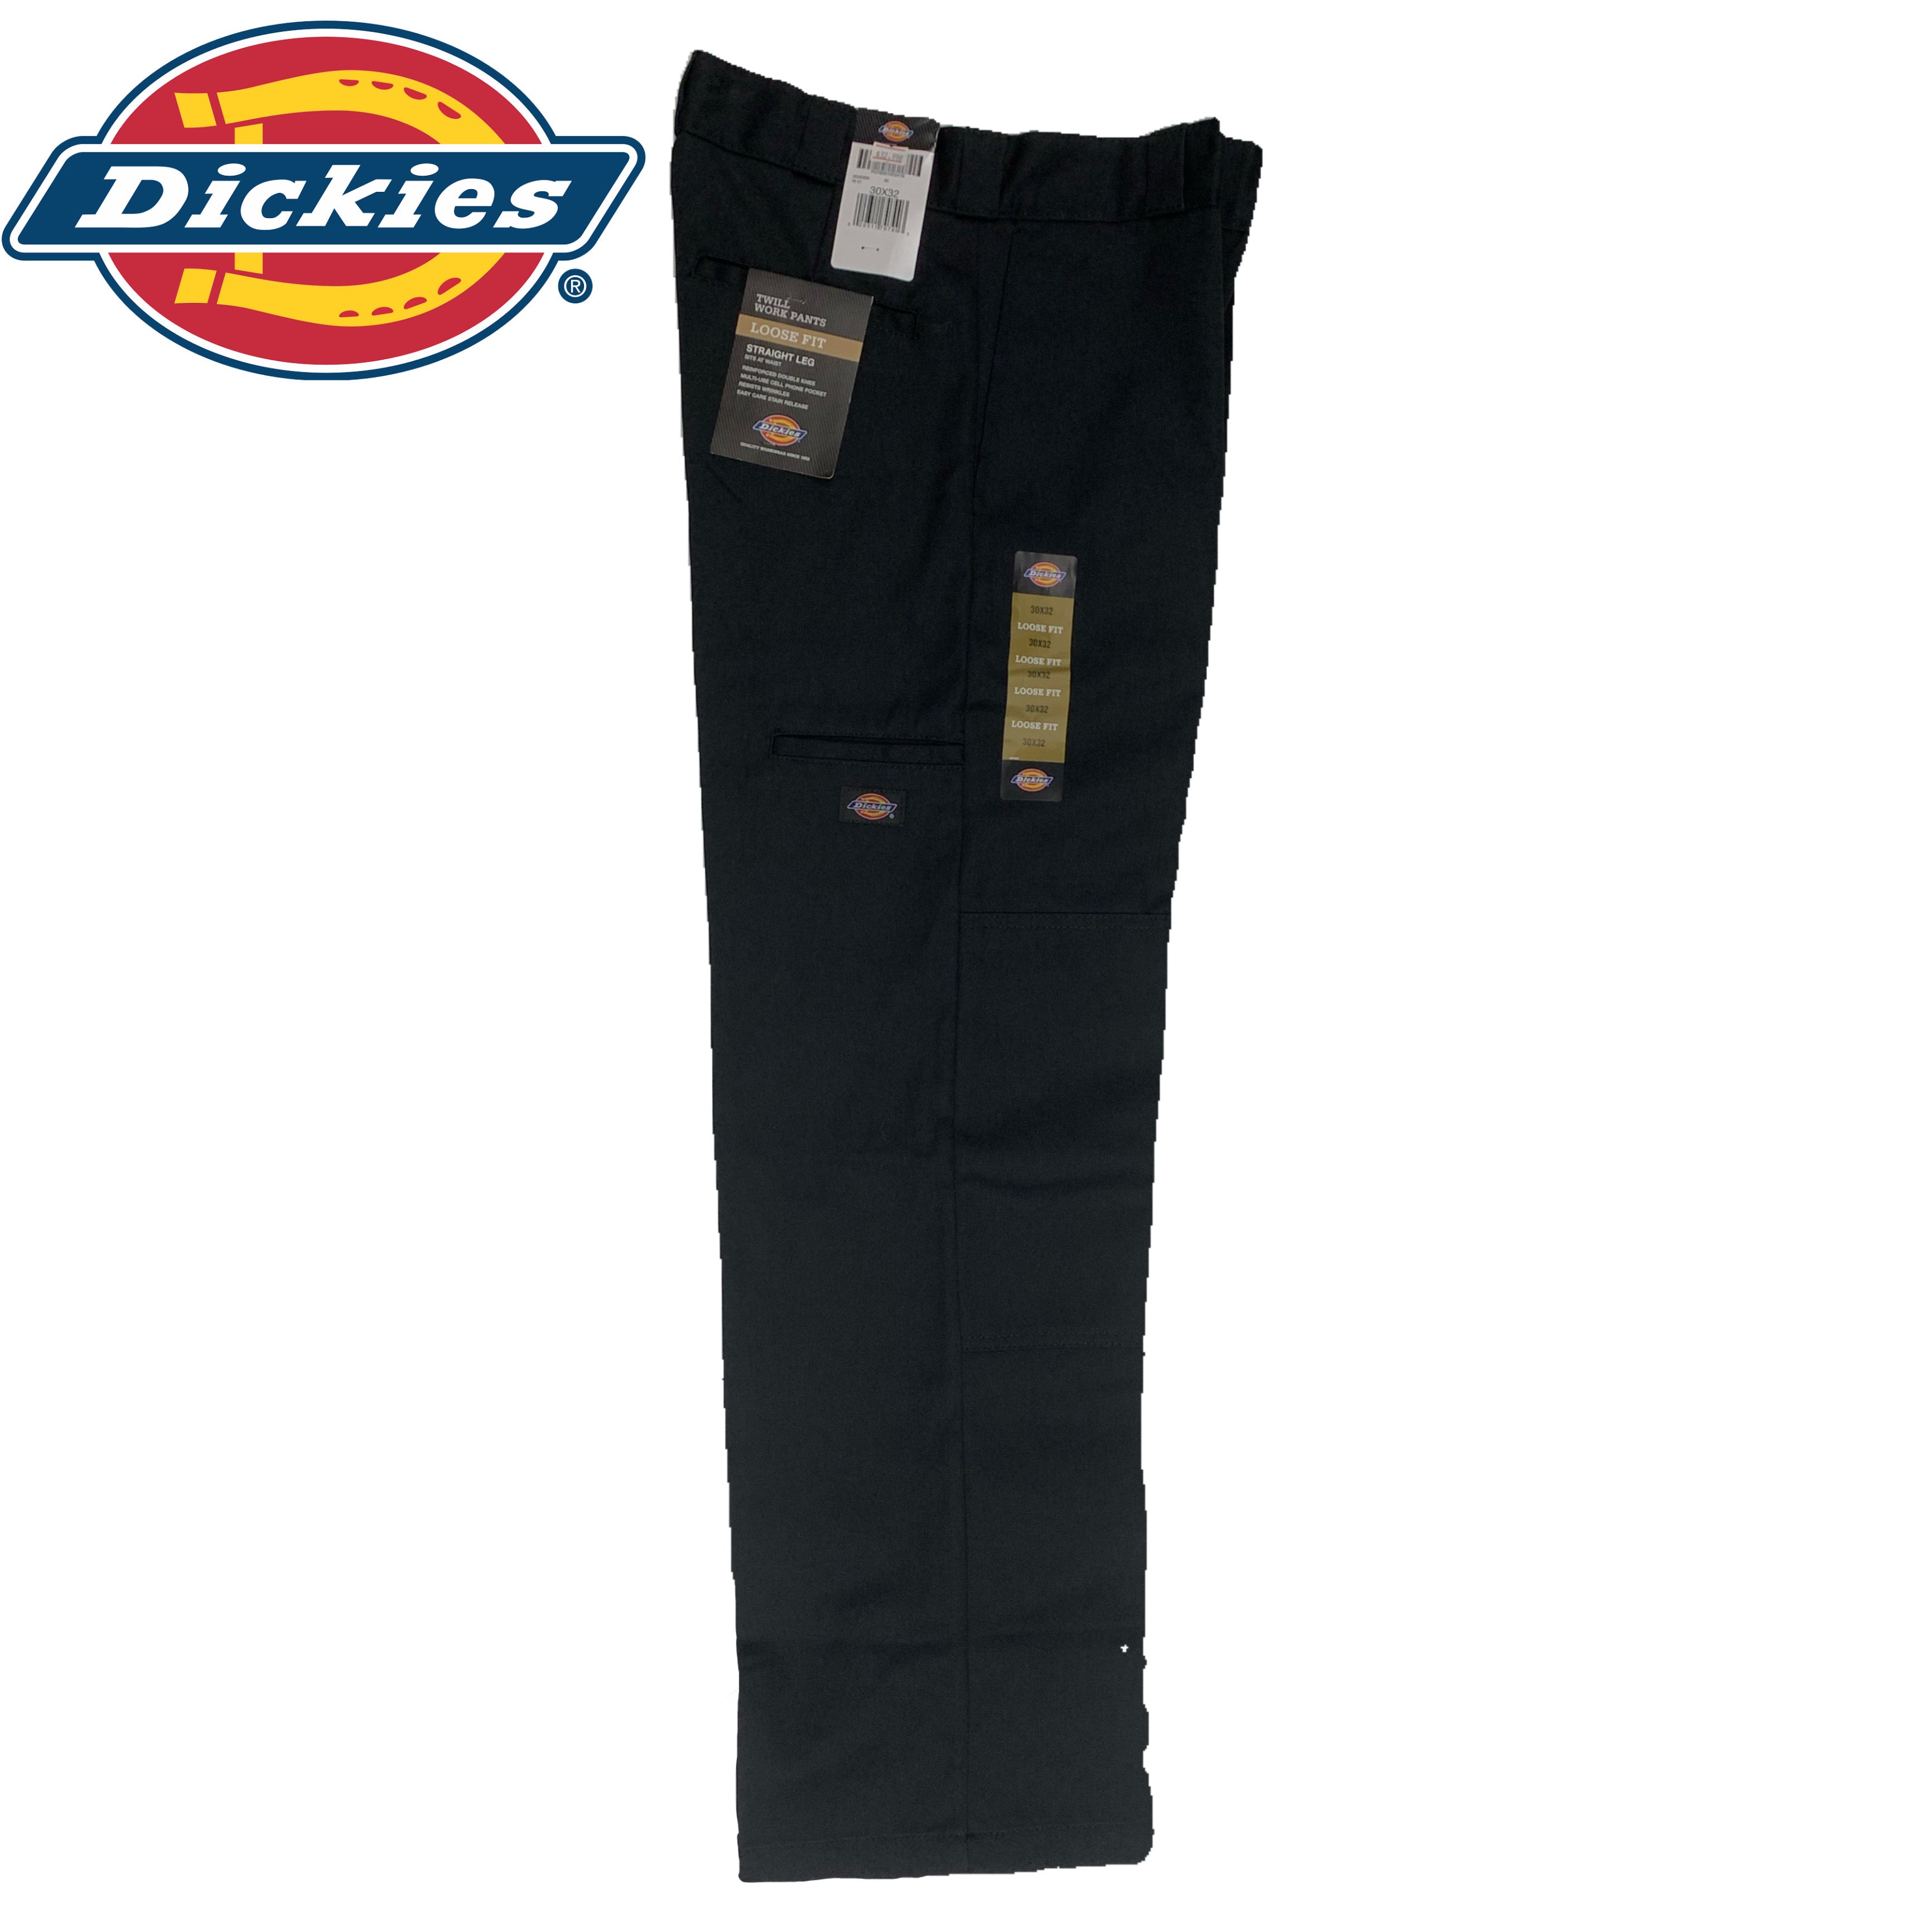 Dickies Crafted for Women Work Pants Size 10 Regular Skinny Fit